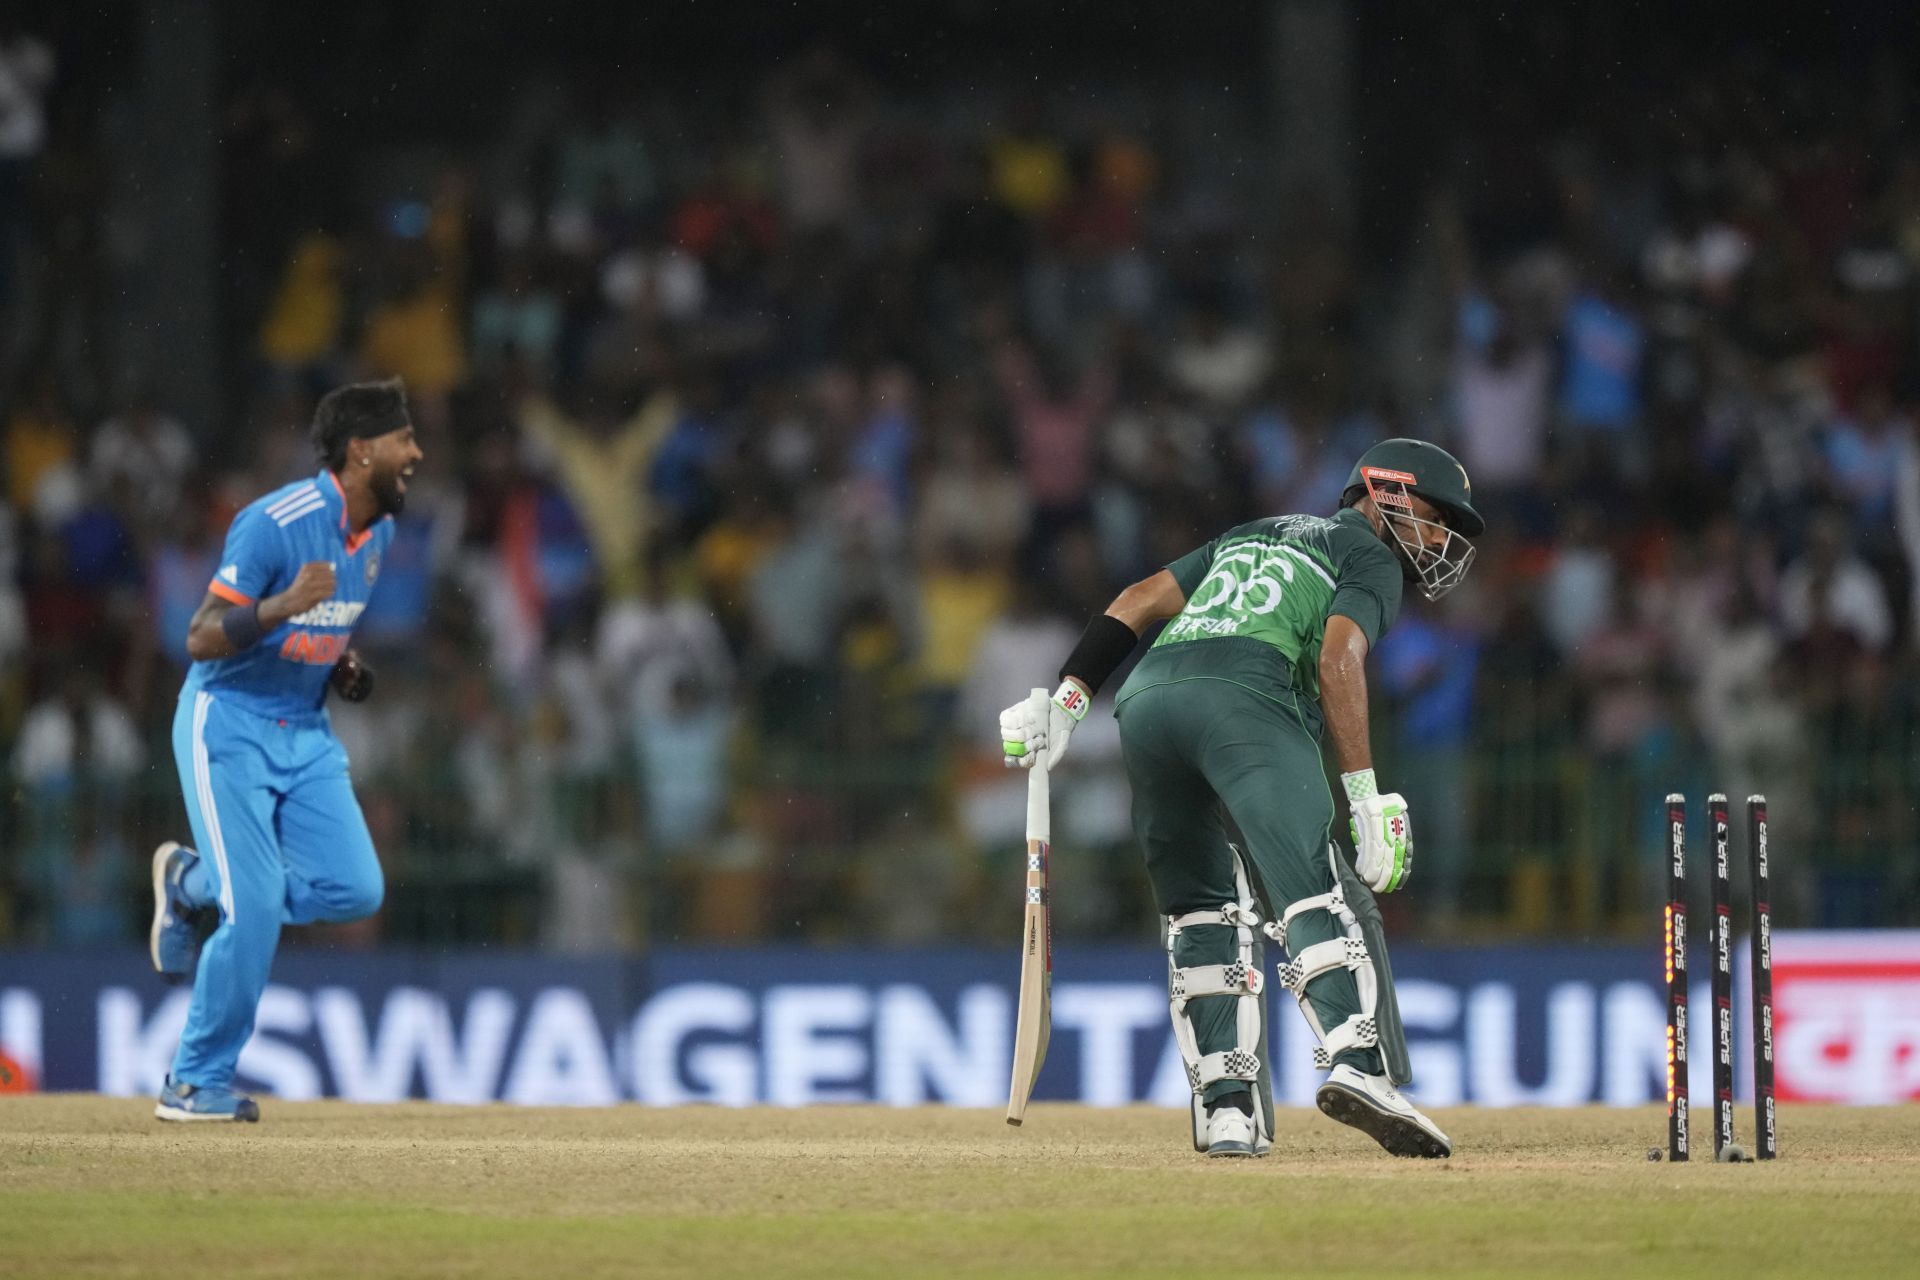 Hardik Pandya got the massive scalp of Pakistan captain Babar Azam for 10, cleaning him up with a beauty - an inswinger that pitched outside off and nipped in sharply. (Pic: AP Photo/Eranga Jayawardena)